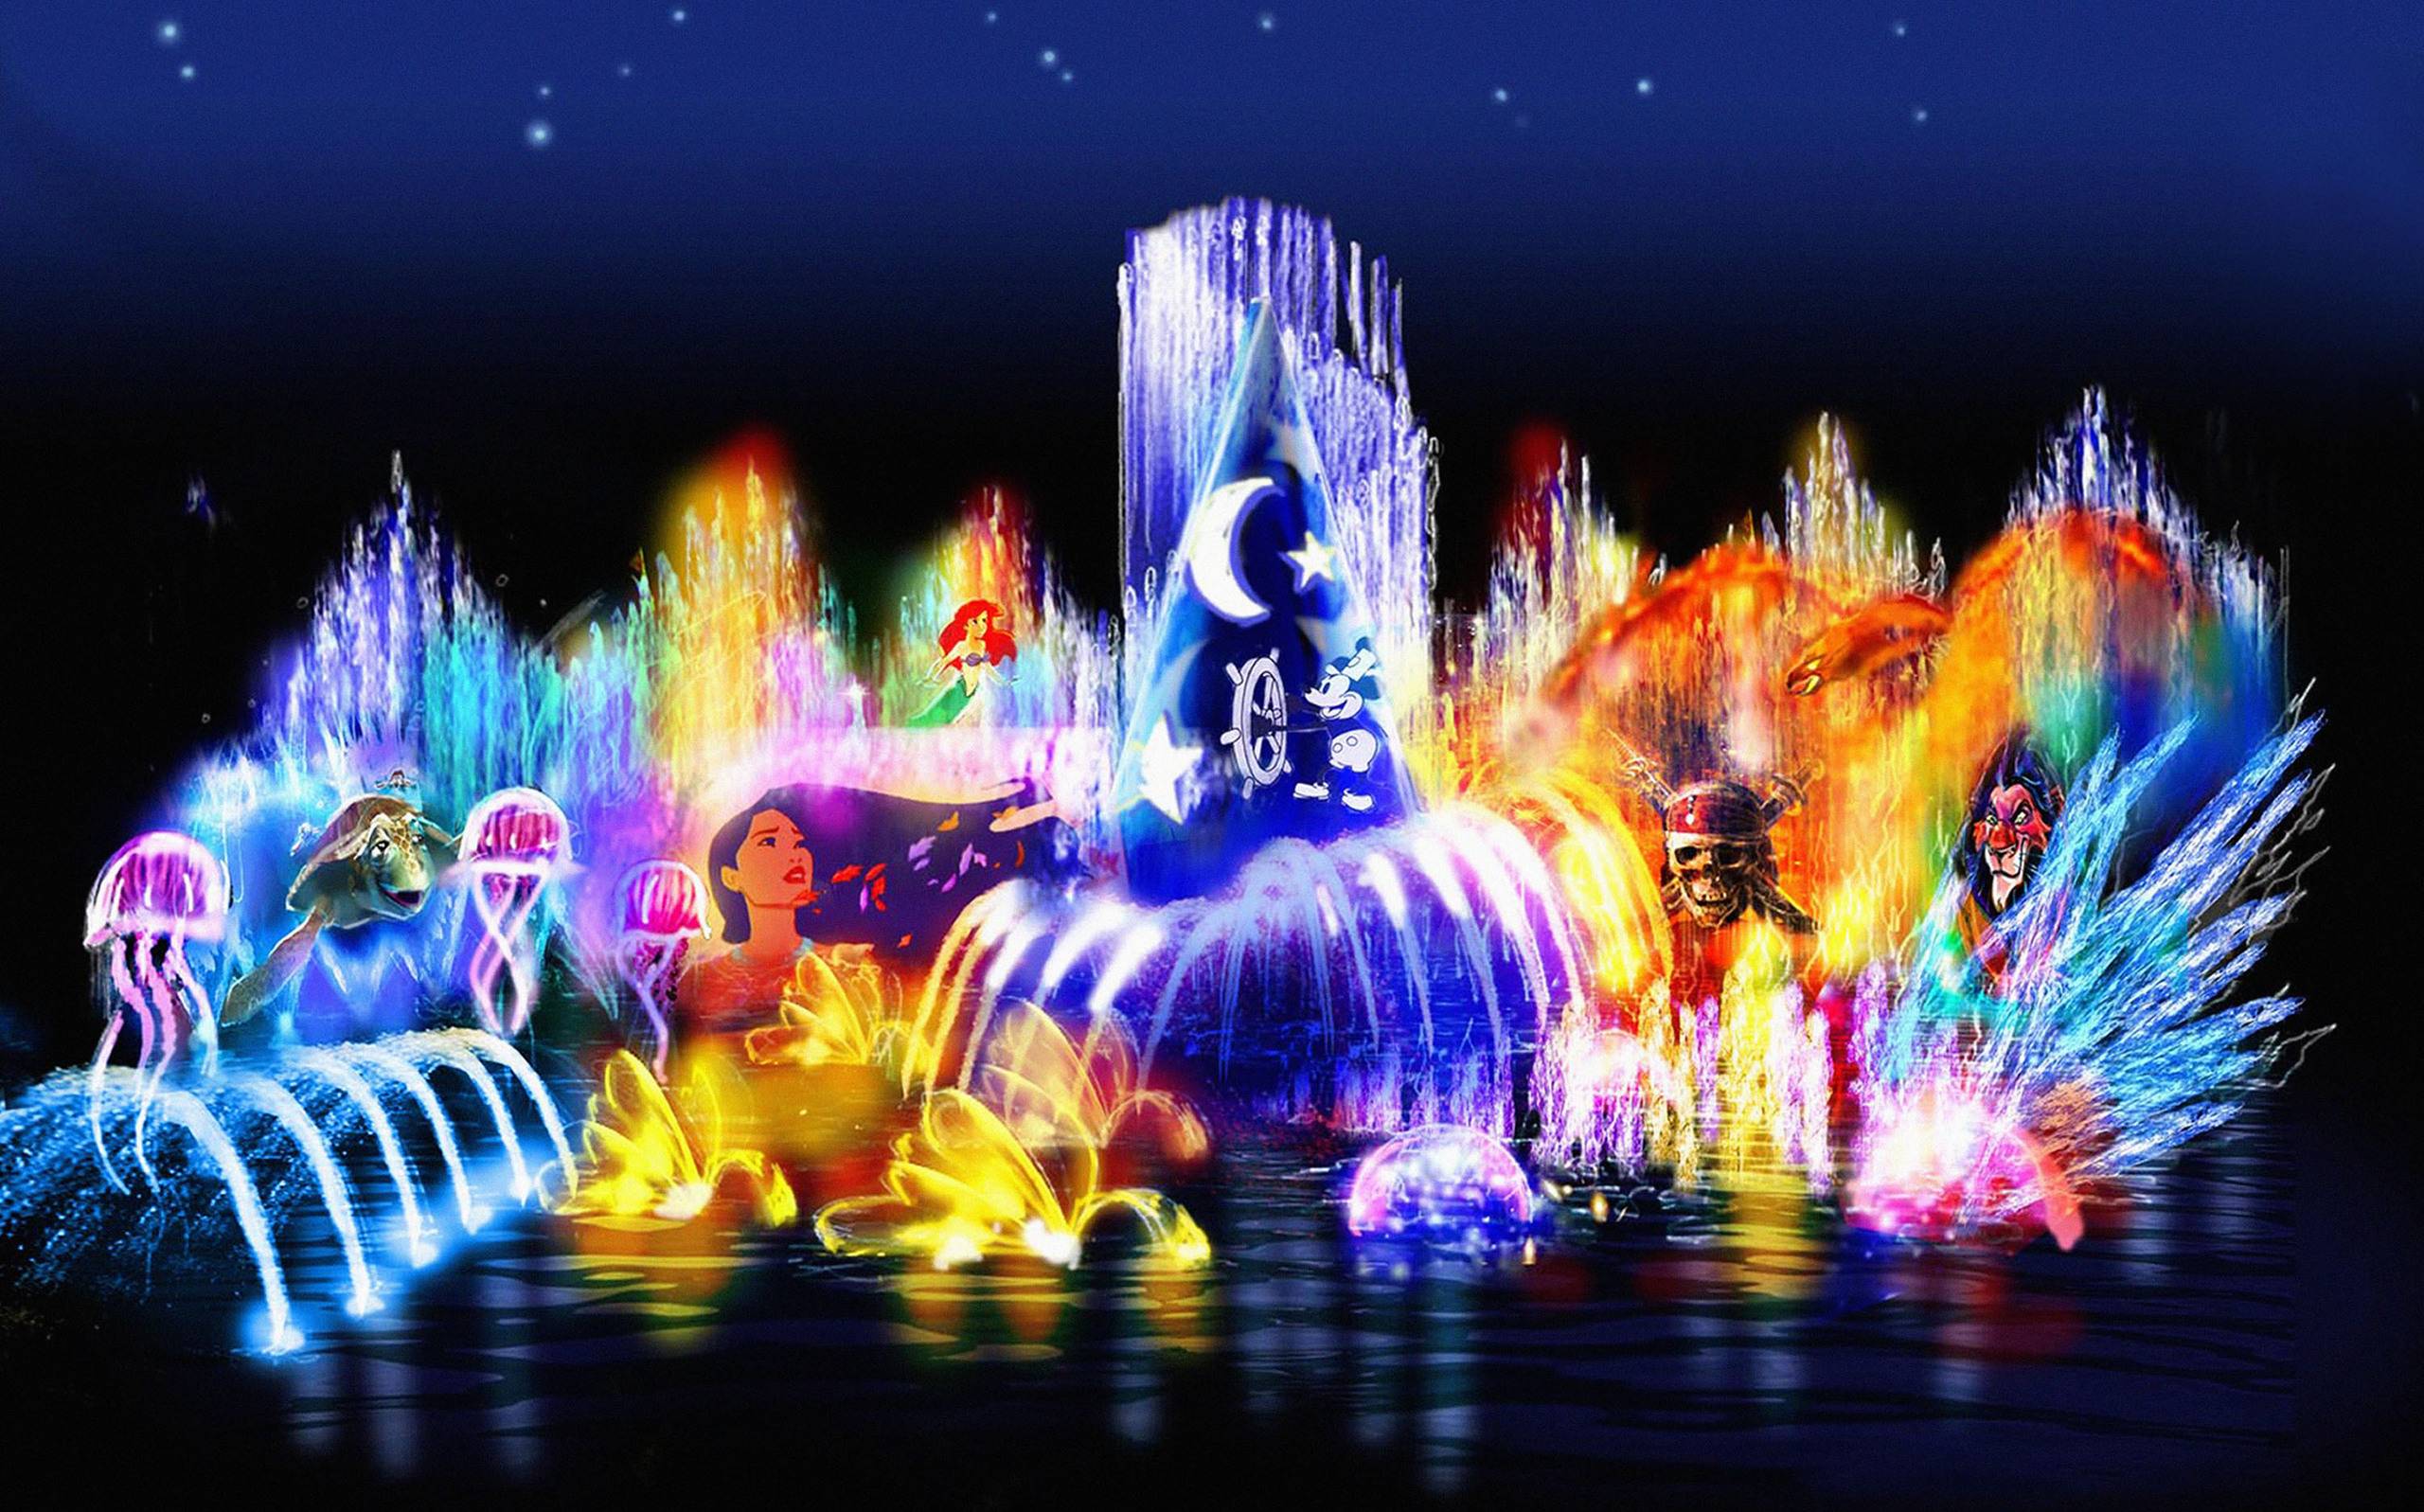 Disney Characters Image Wallpaper 24912 High Resolution. download